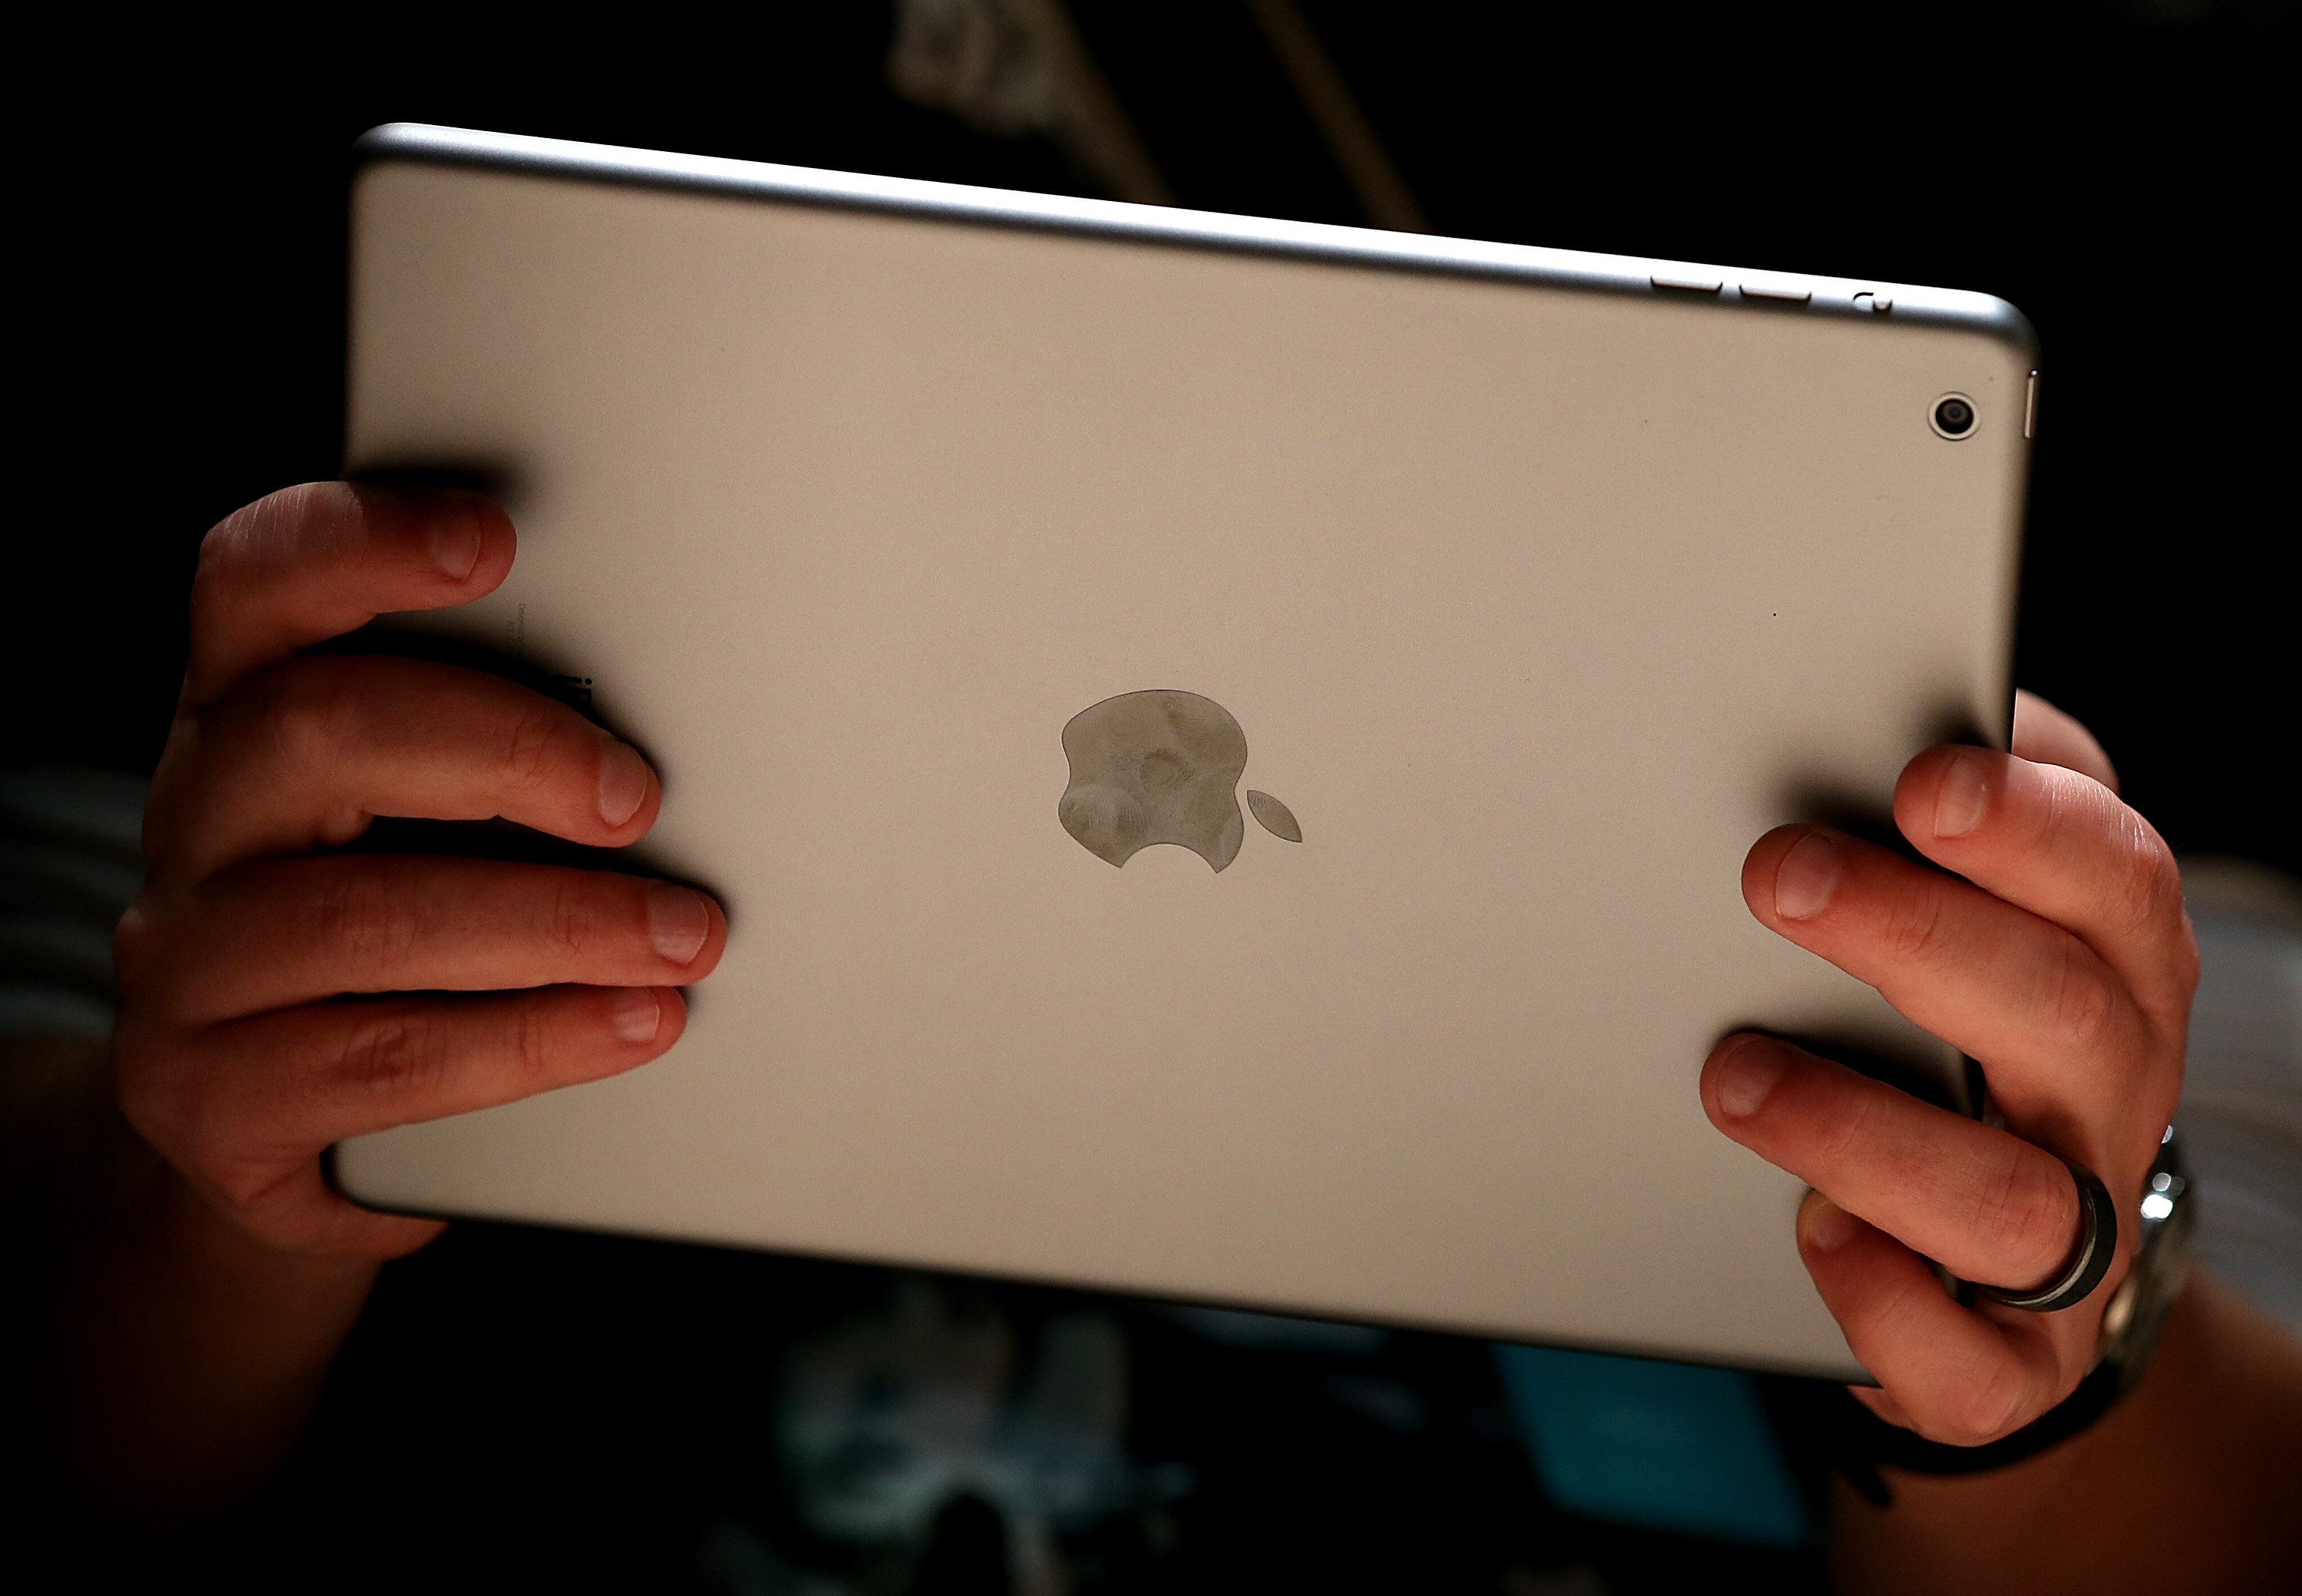 An attendee looks at the new iPad Air during an Apple announcement at the Yerba Buena Center for the Arts on October 22, 2013 in San Francisco, California. (Justin Sullivan&mdash;Getty Images)